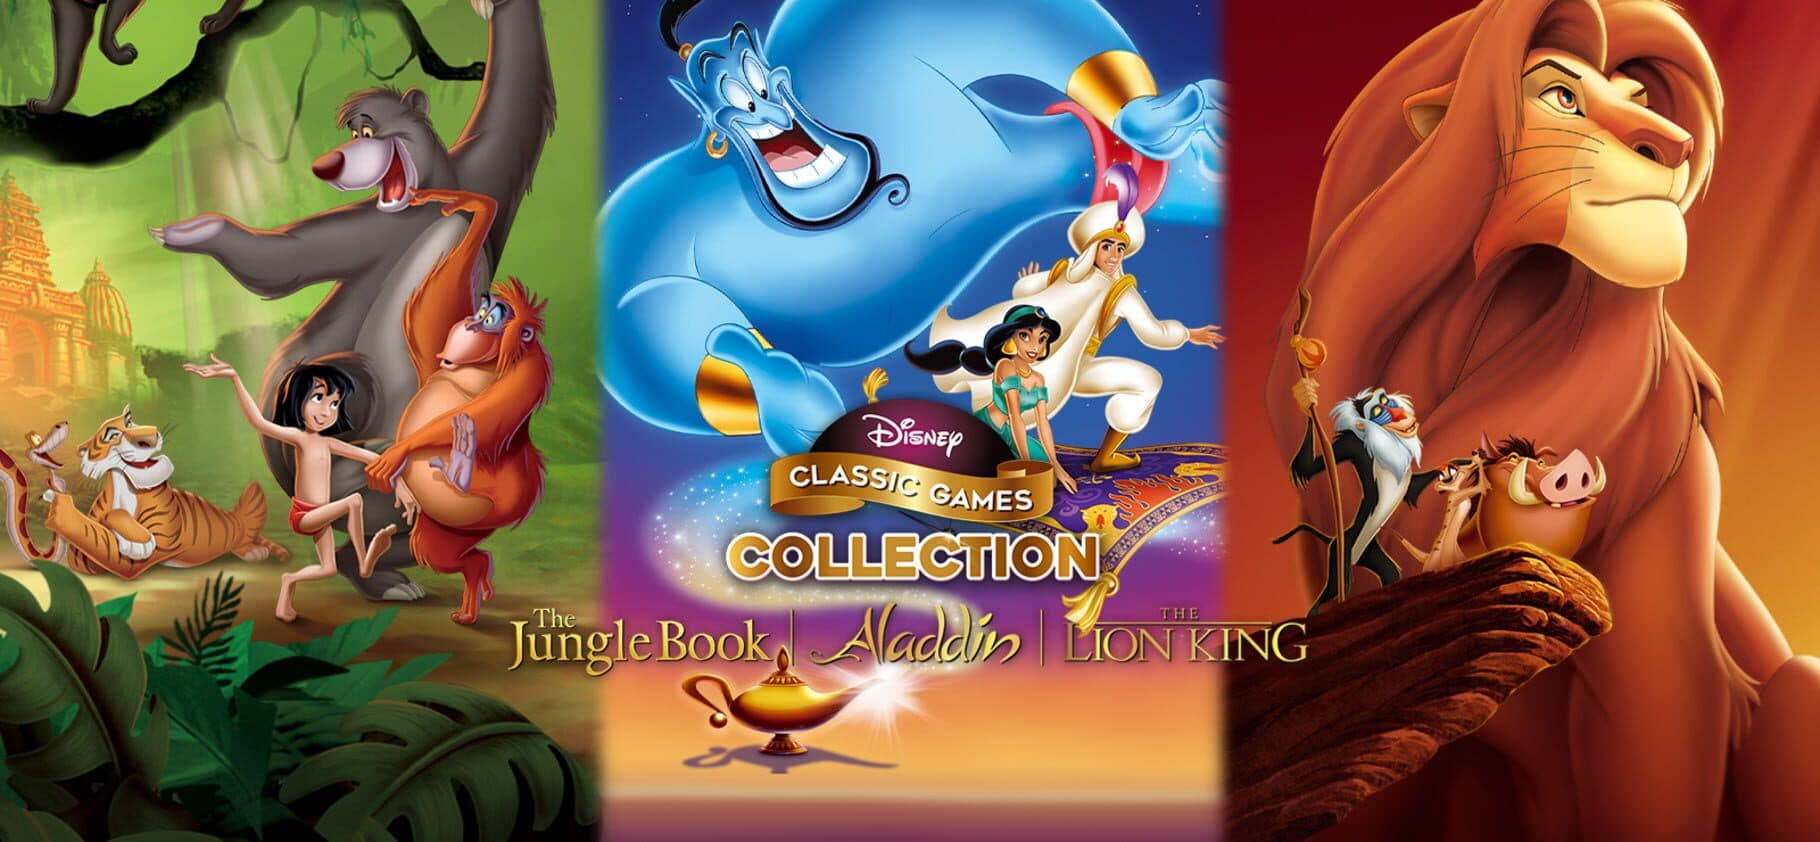 Disney Classic Games Collection Image